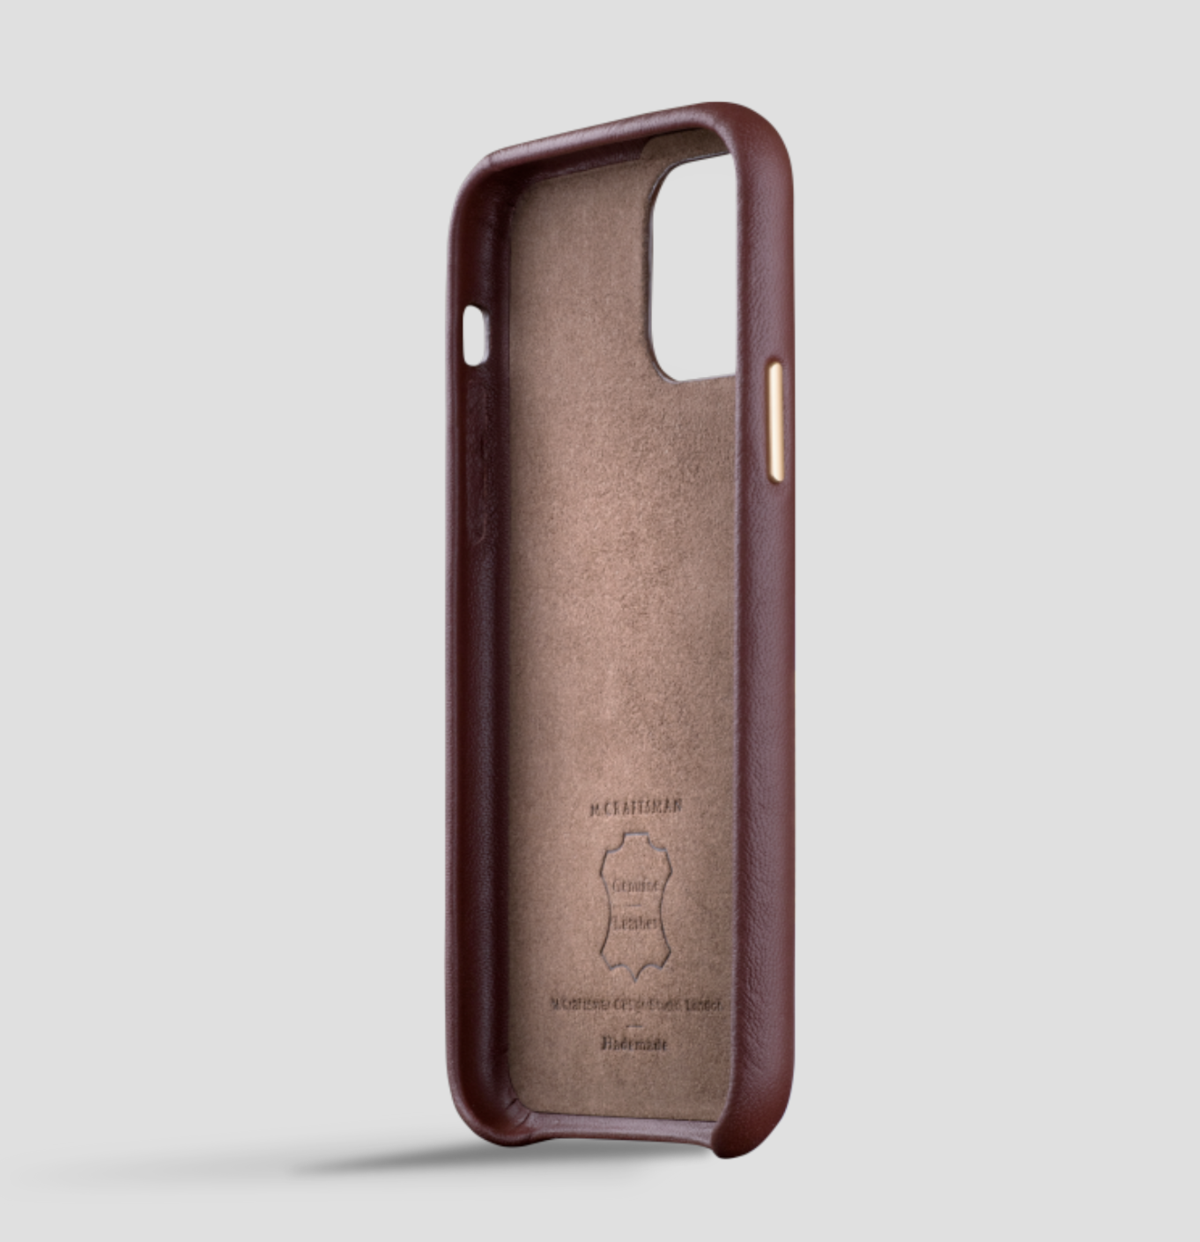 M.Craftsman WeaRing Leather Case for iPhone 11 Cases